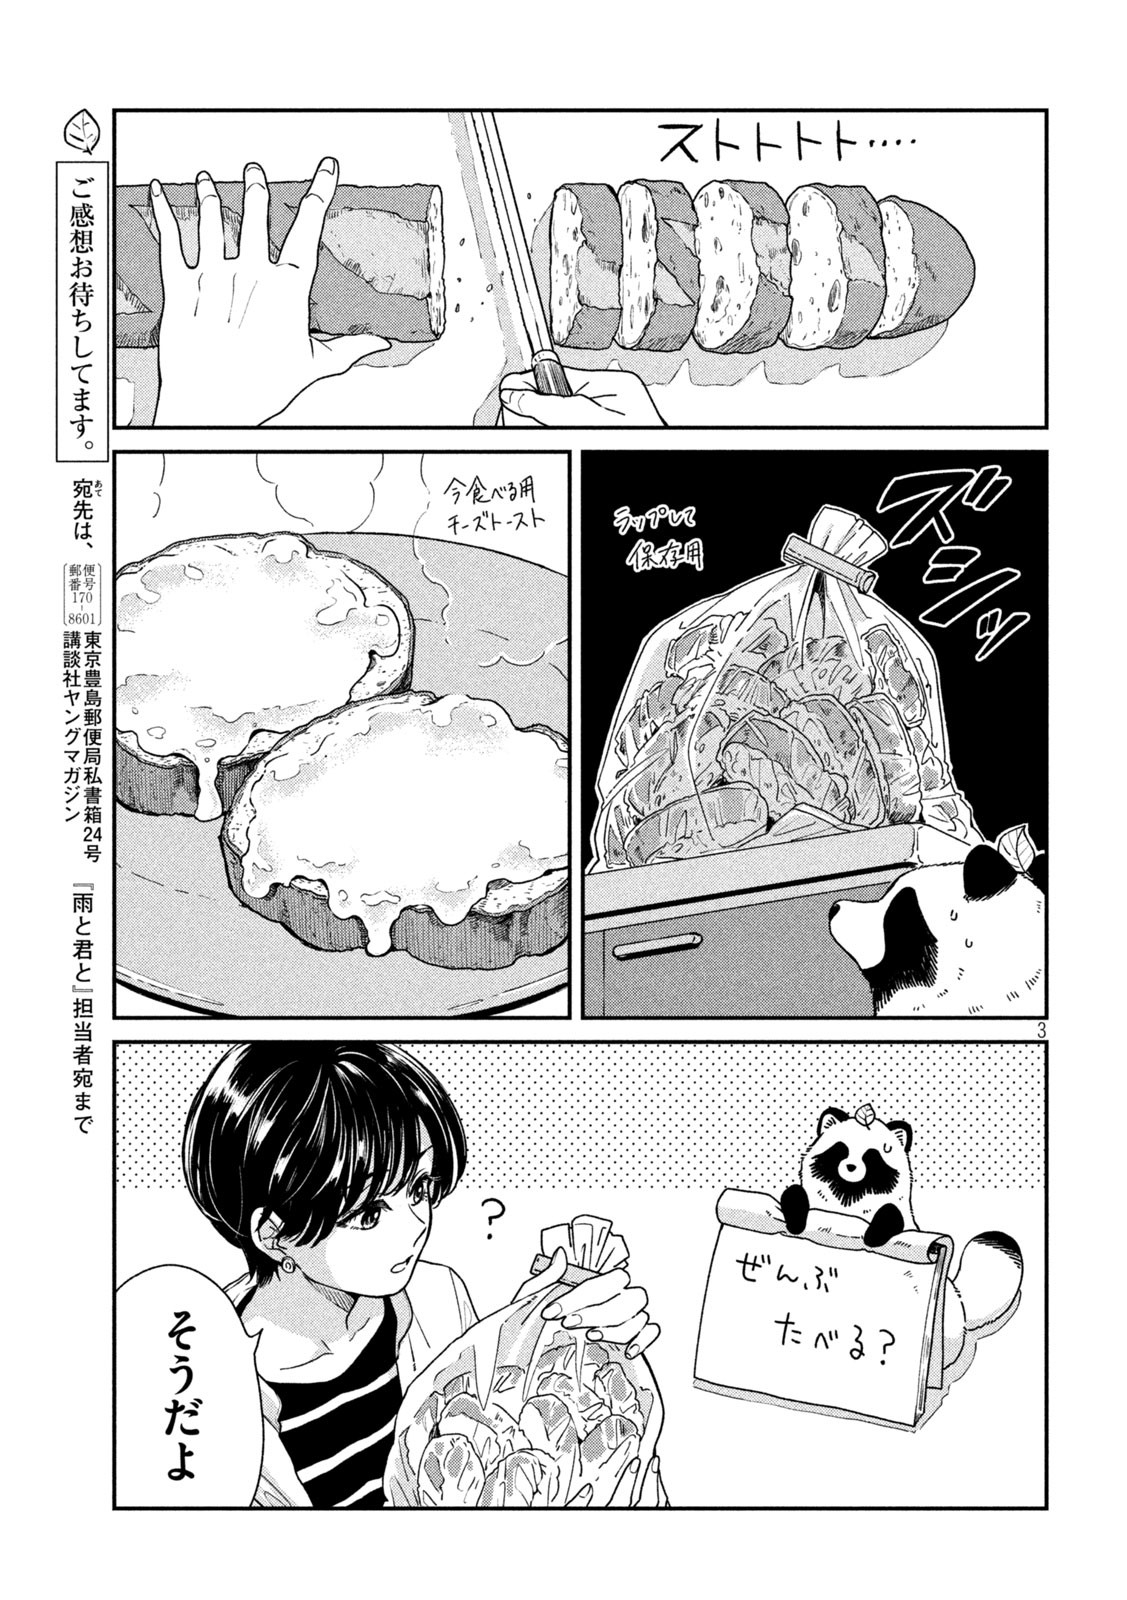 Ame to Kimi to - Chapter 90 - Page 3